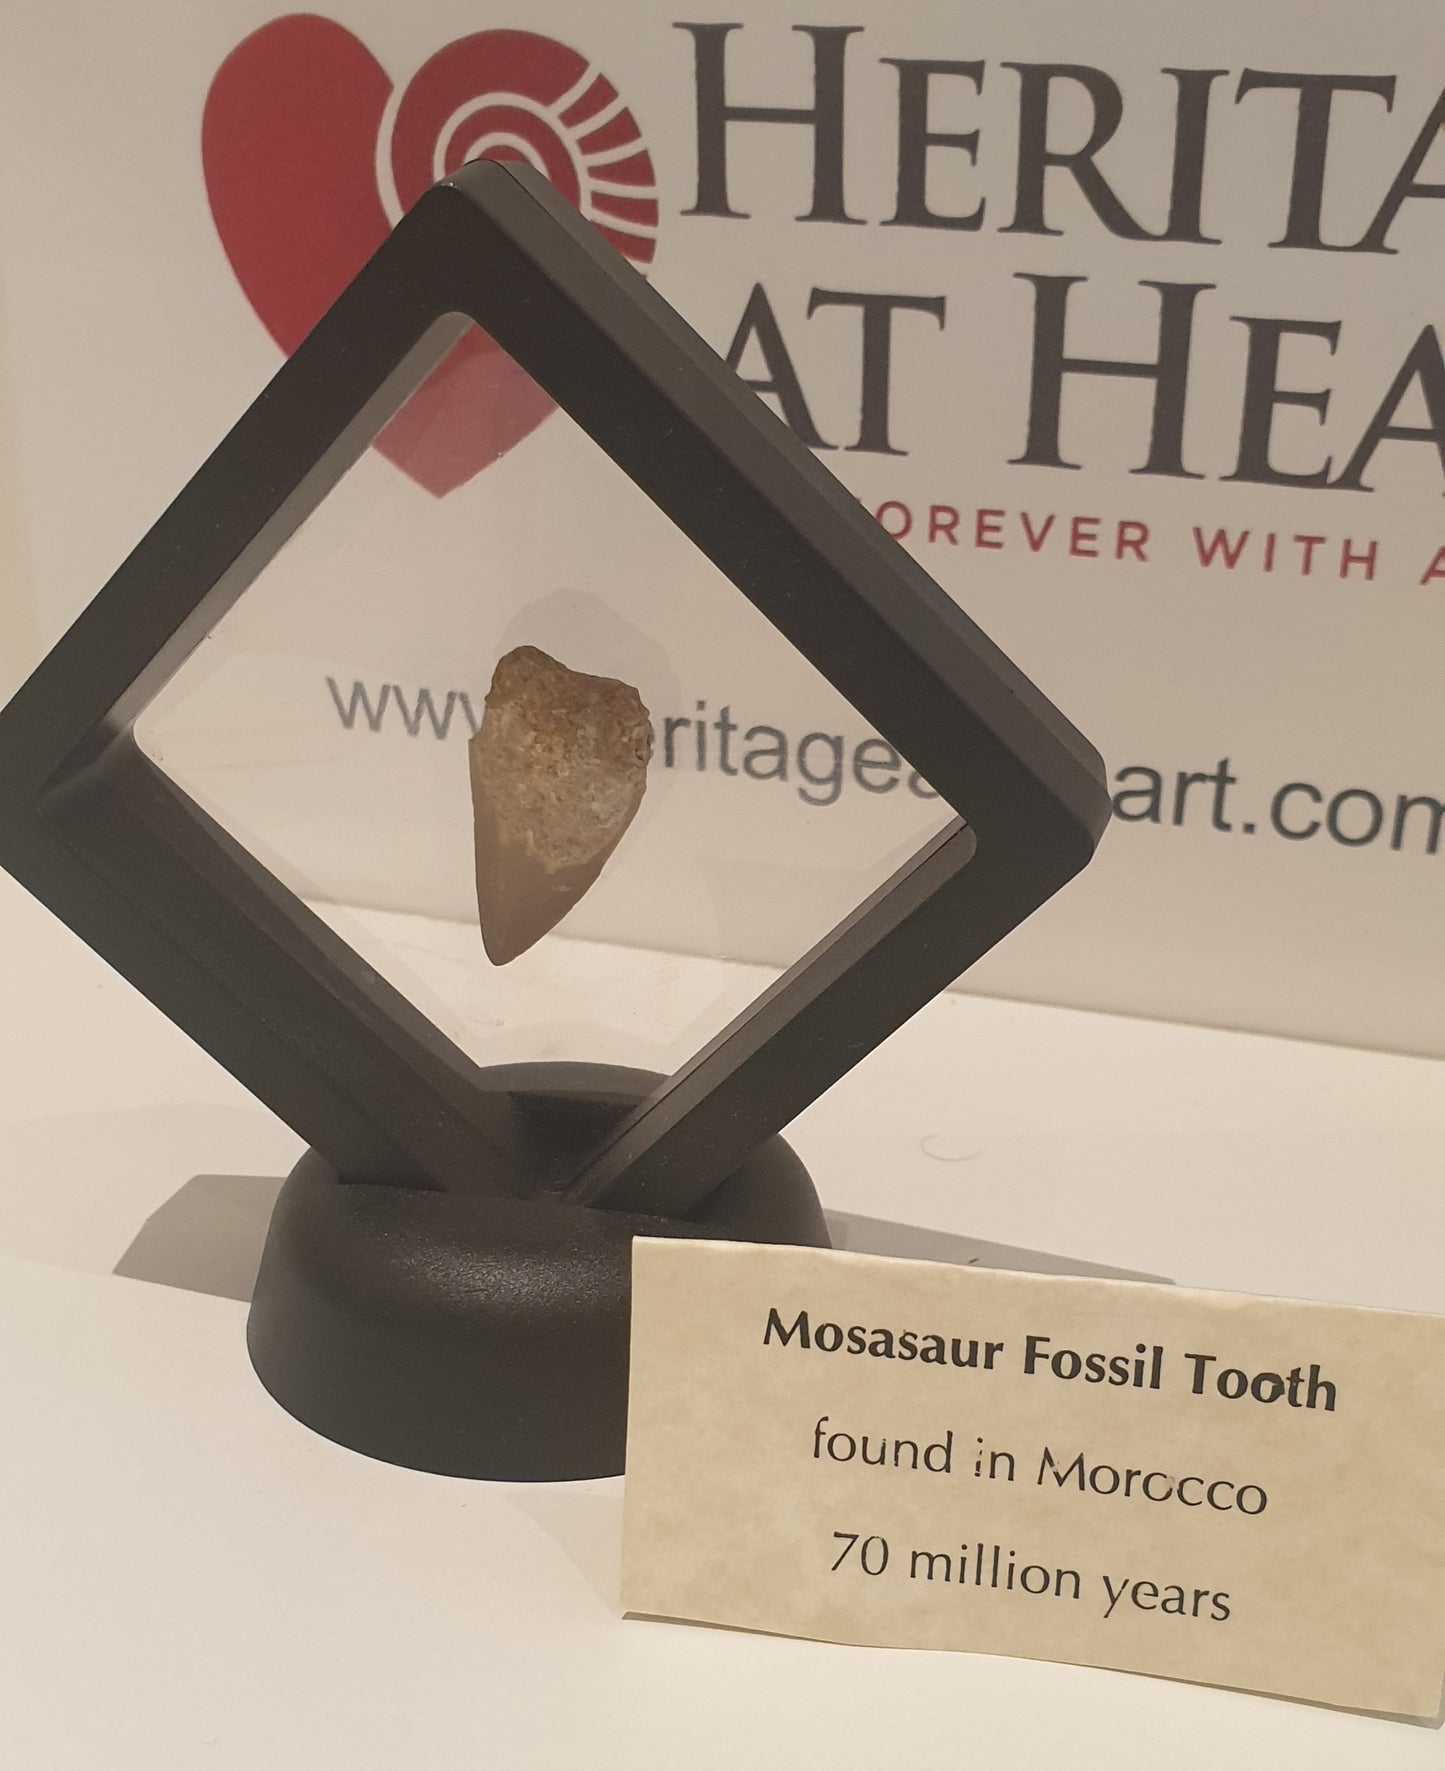 2cm Mosasaur Tooth Fossil from Morocco (70 million years)